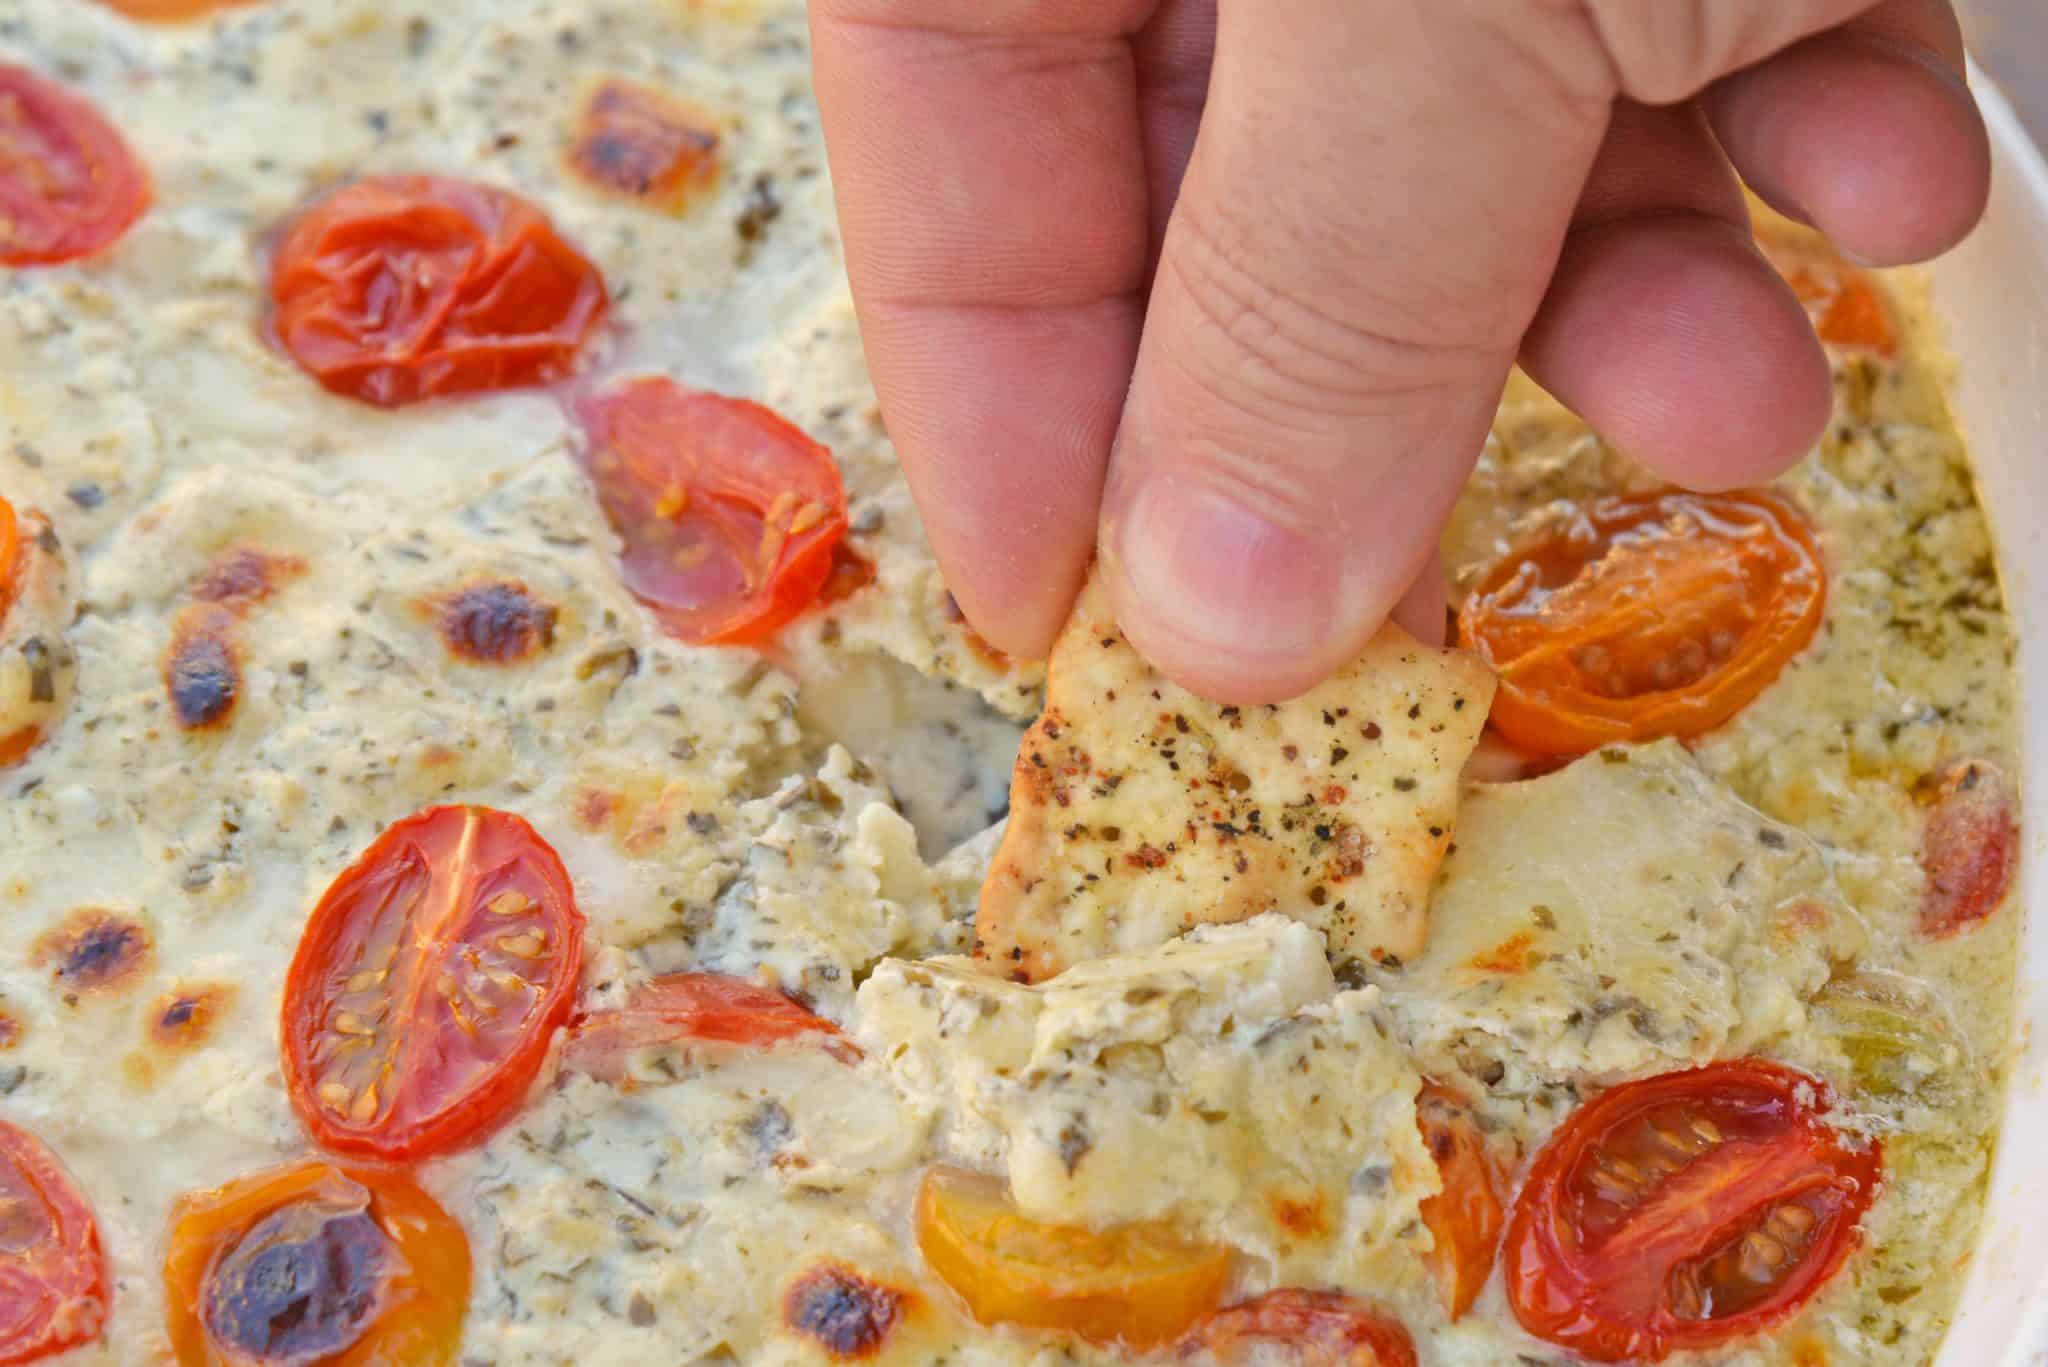 Hot Caprese Dip is a party appetizer favorite using mozzarella, pesto and sweet tomatoes. An easy appetizer your guests will love! #capresedip #capresesalad #partyappetizers www.savoryexperiments.com 